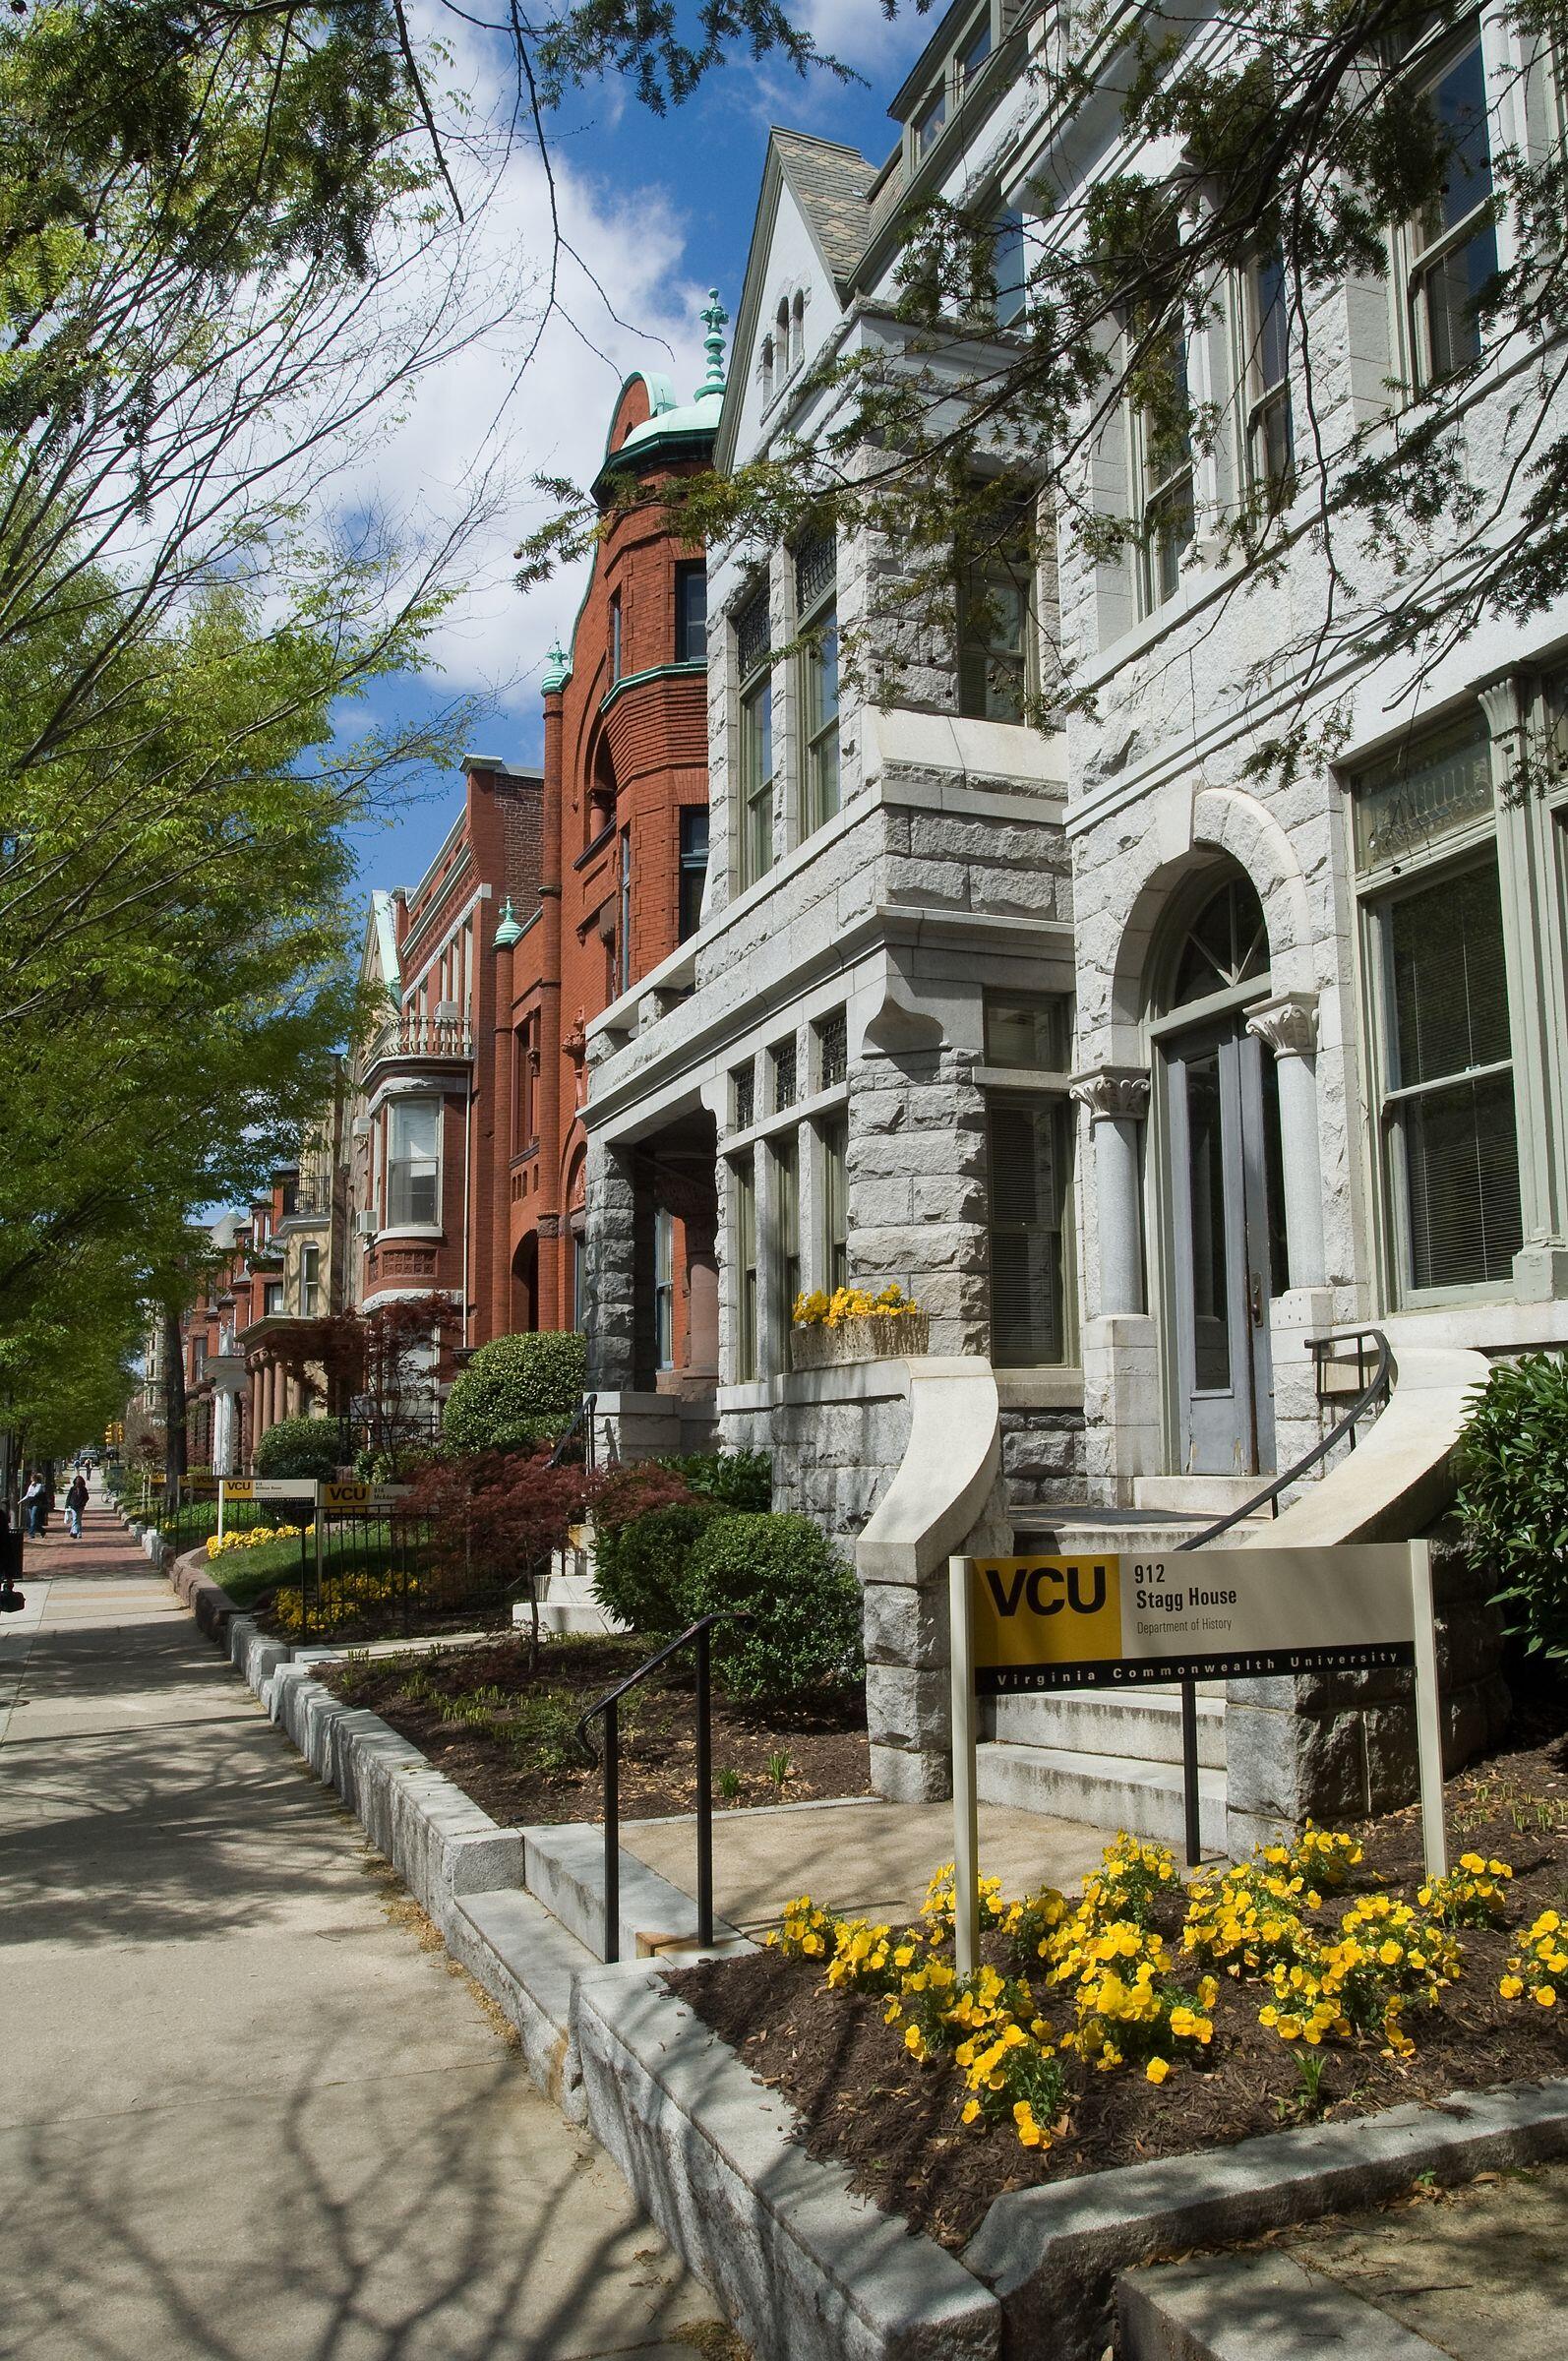 Several notable VCU offices are housed inside the picturesque, historic buildings along Franklin Street. (Photo by Jennifer Watson, University Relations)